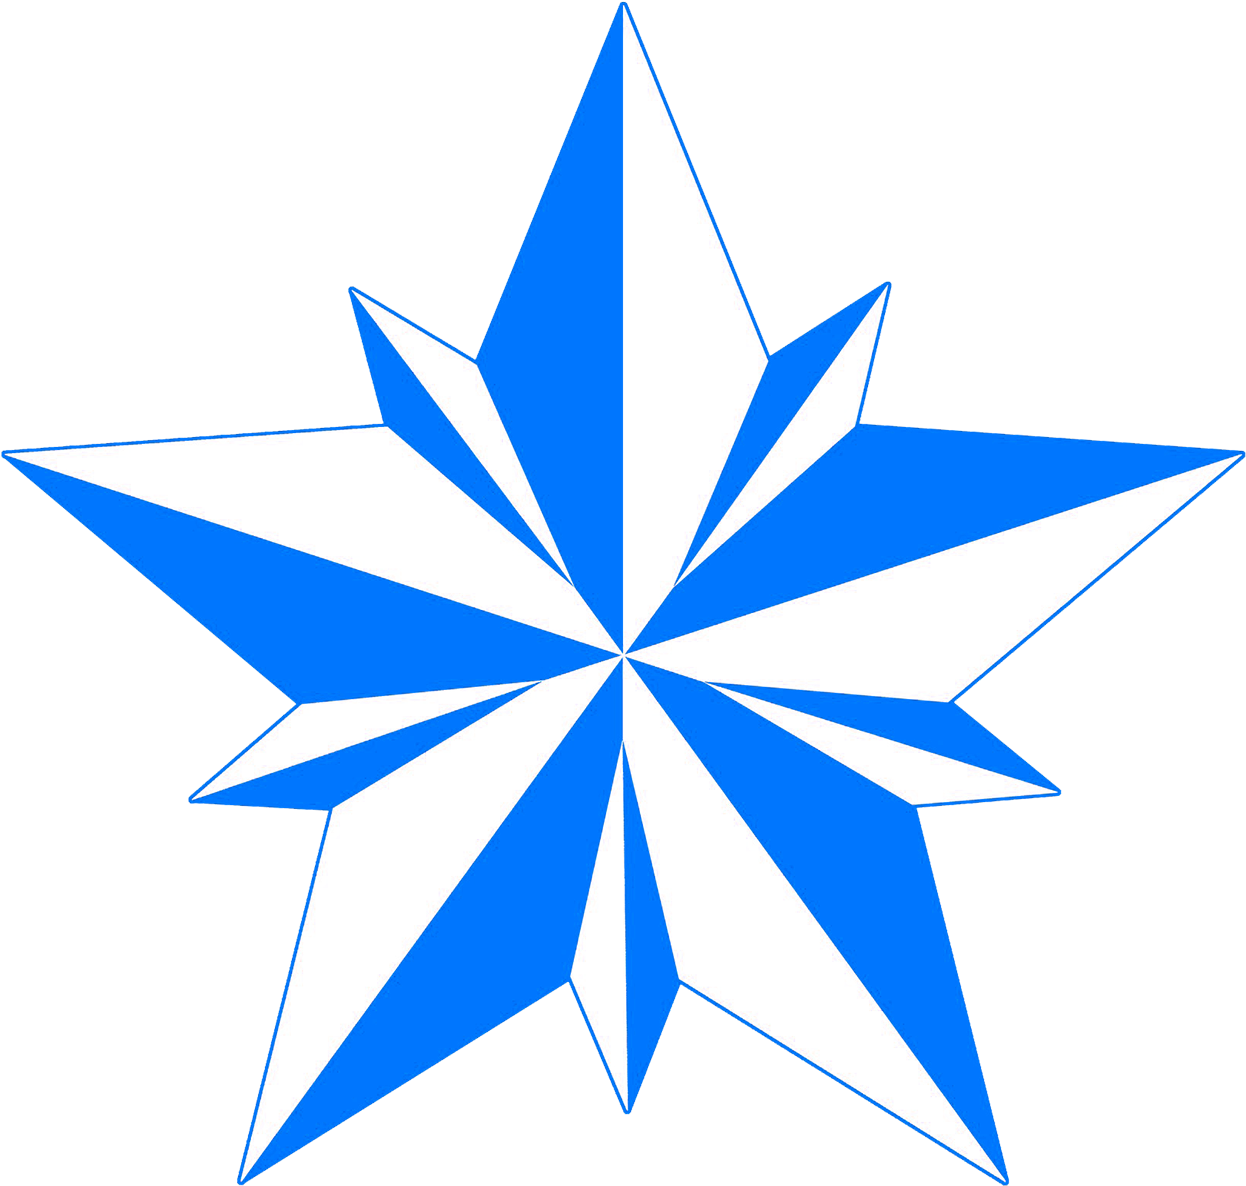 Green Star Image With Rounded Points - Nautical Star (1476x1476)